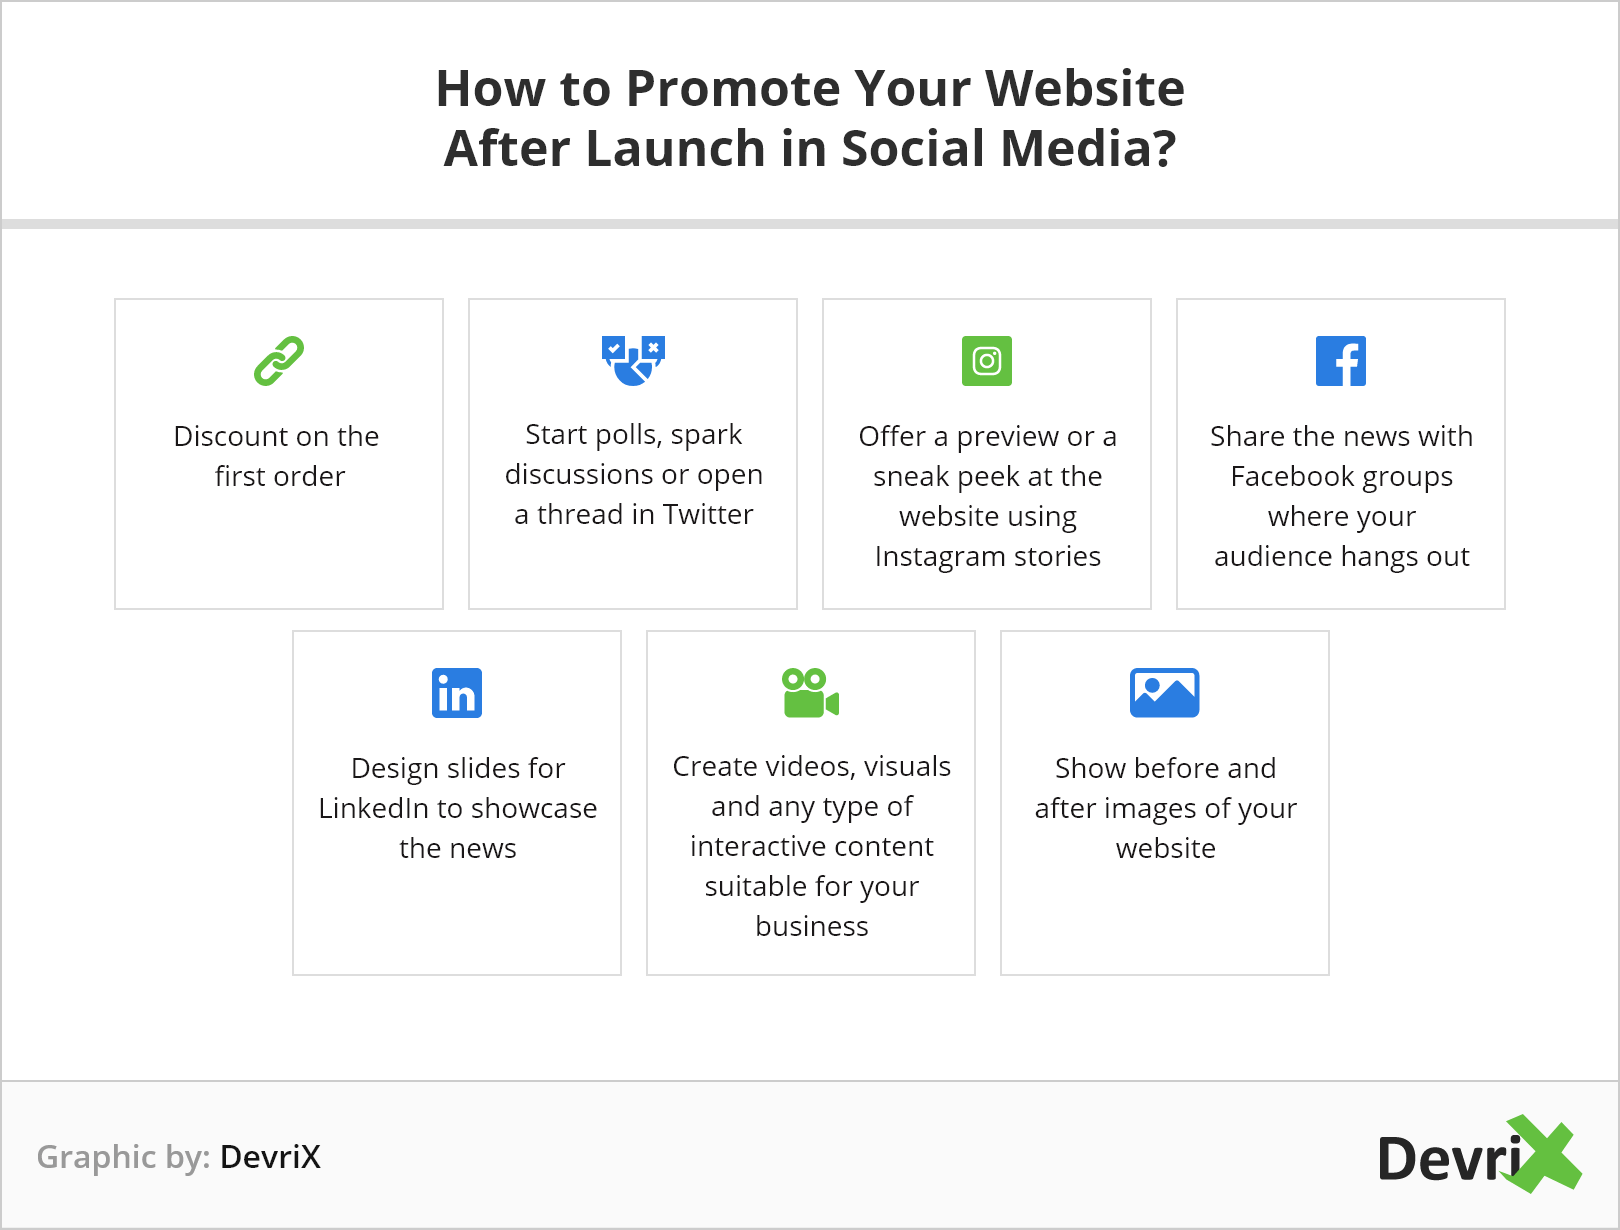 How-to-promote-your-website-after-launch-in-social-media-graphic